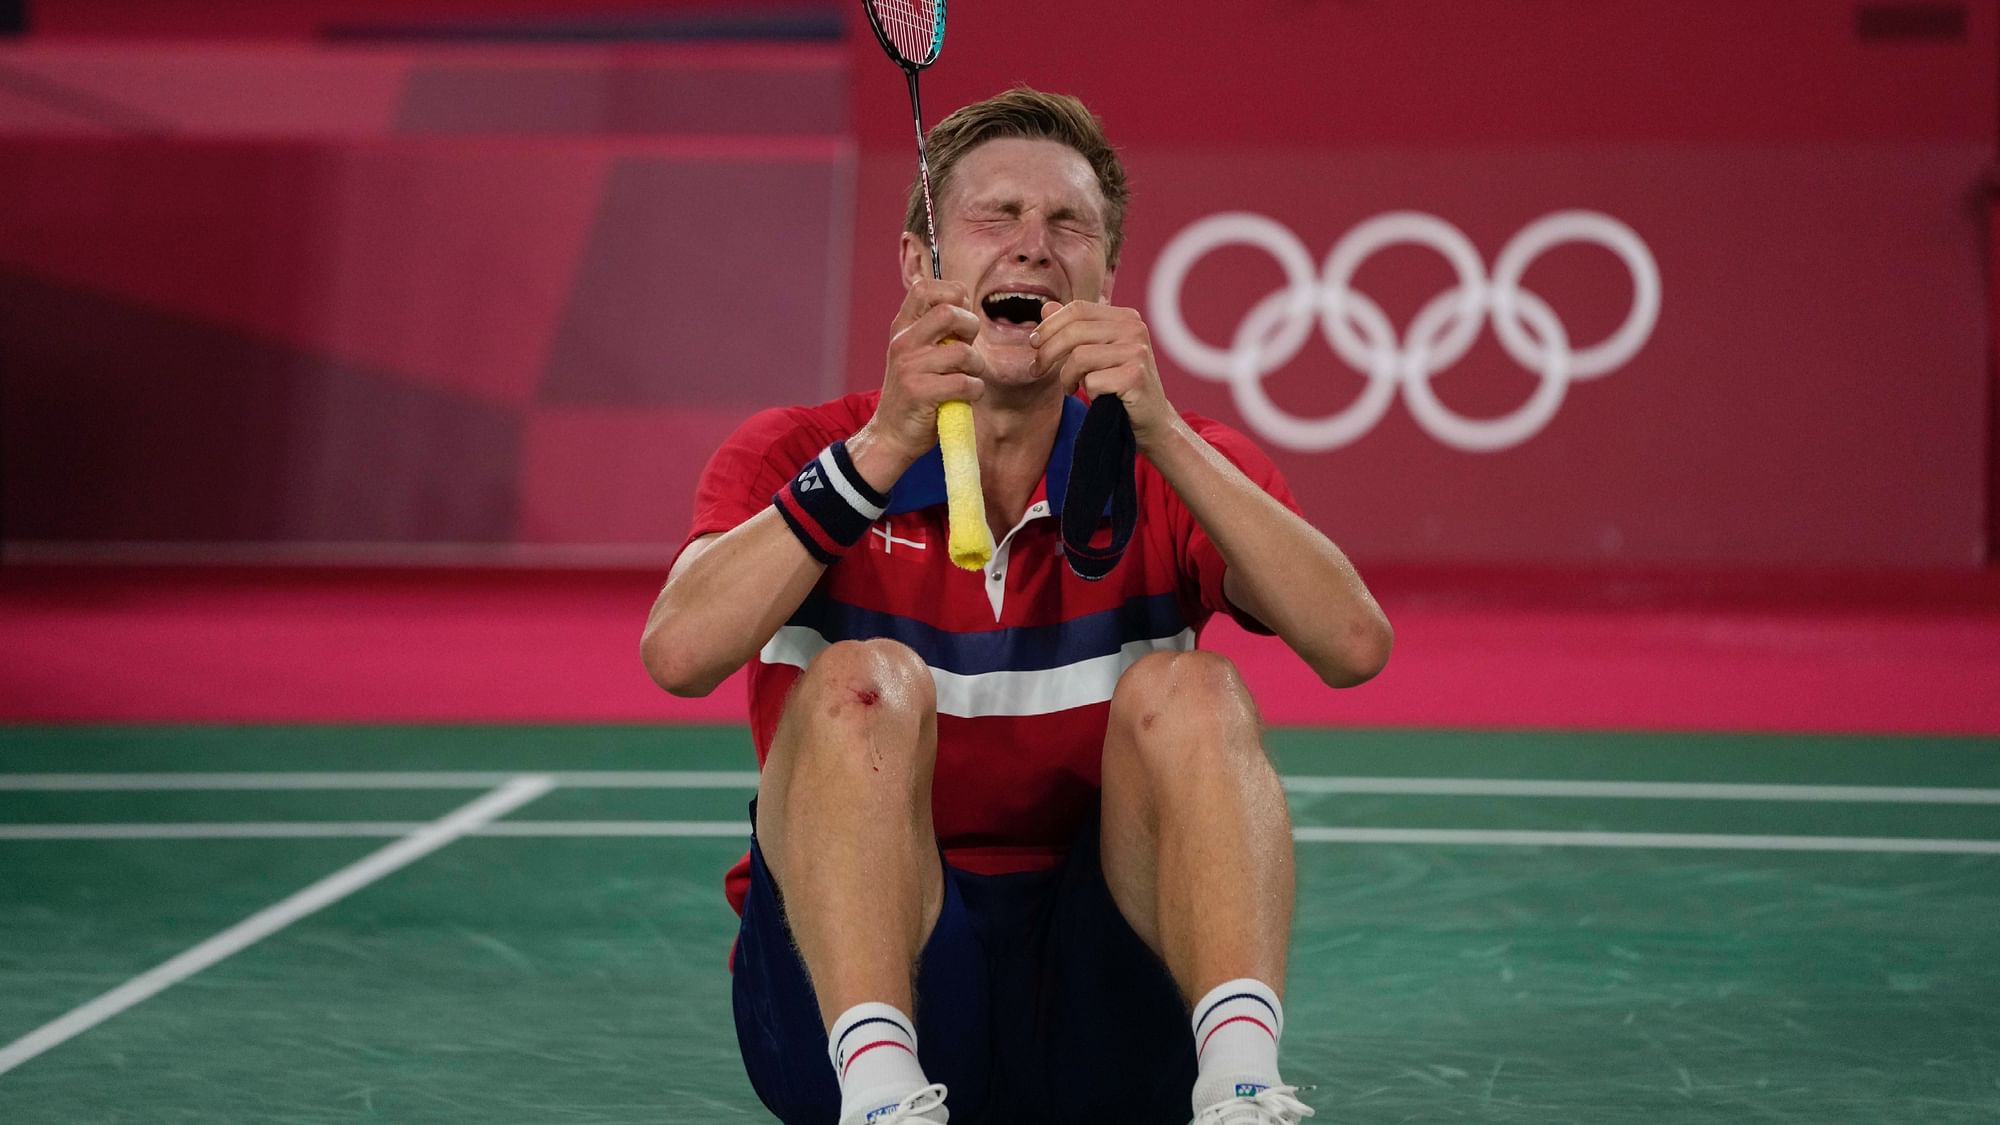 <div class="paragraphs"><p>Viktor Axelsen won his second consecutive Olympic medal. He won the bronze medal in 2016 Rio Olympics</p></div>